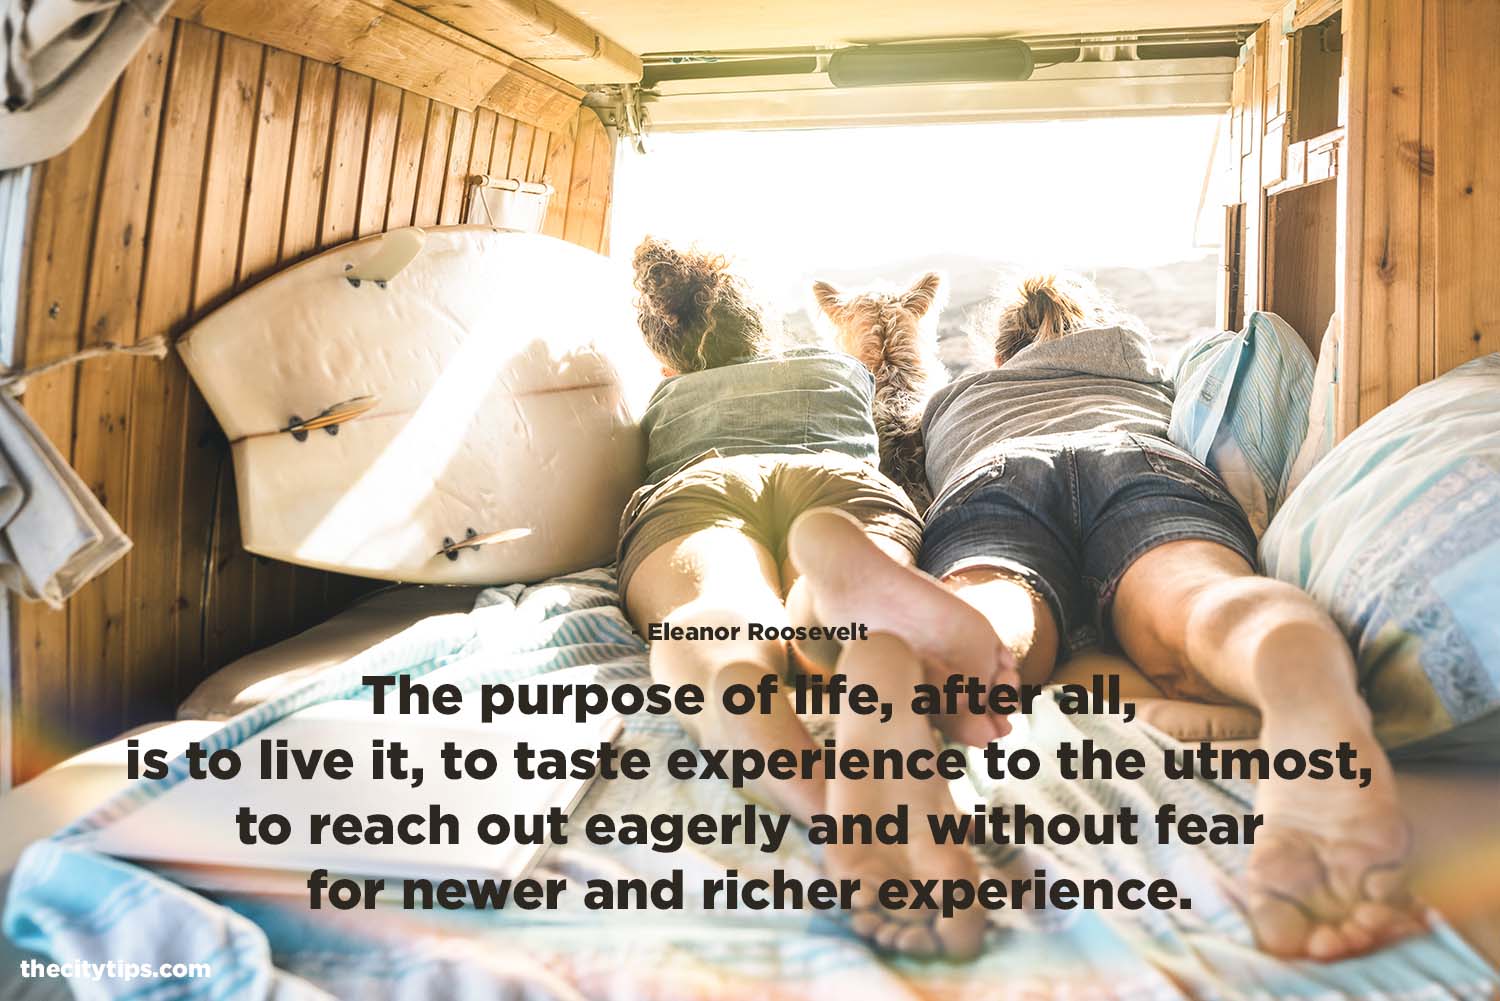 "The purpose of life, after all, is to live it, to taste experience to the utmost, to reach out eagerly and without fear for newer and richer experience." by Eleanor Roosevelt